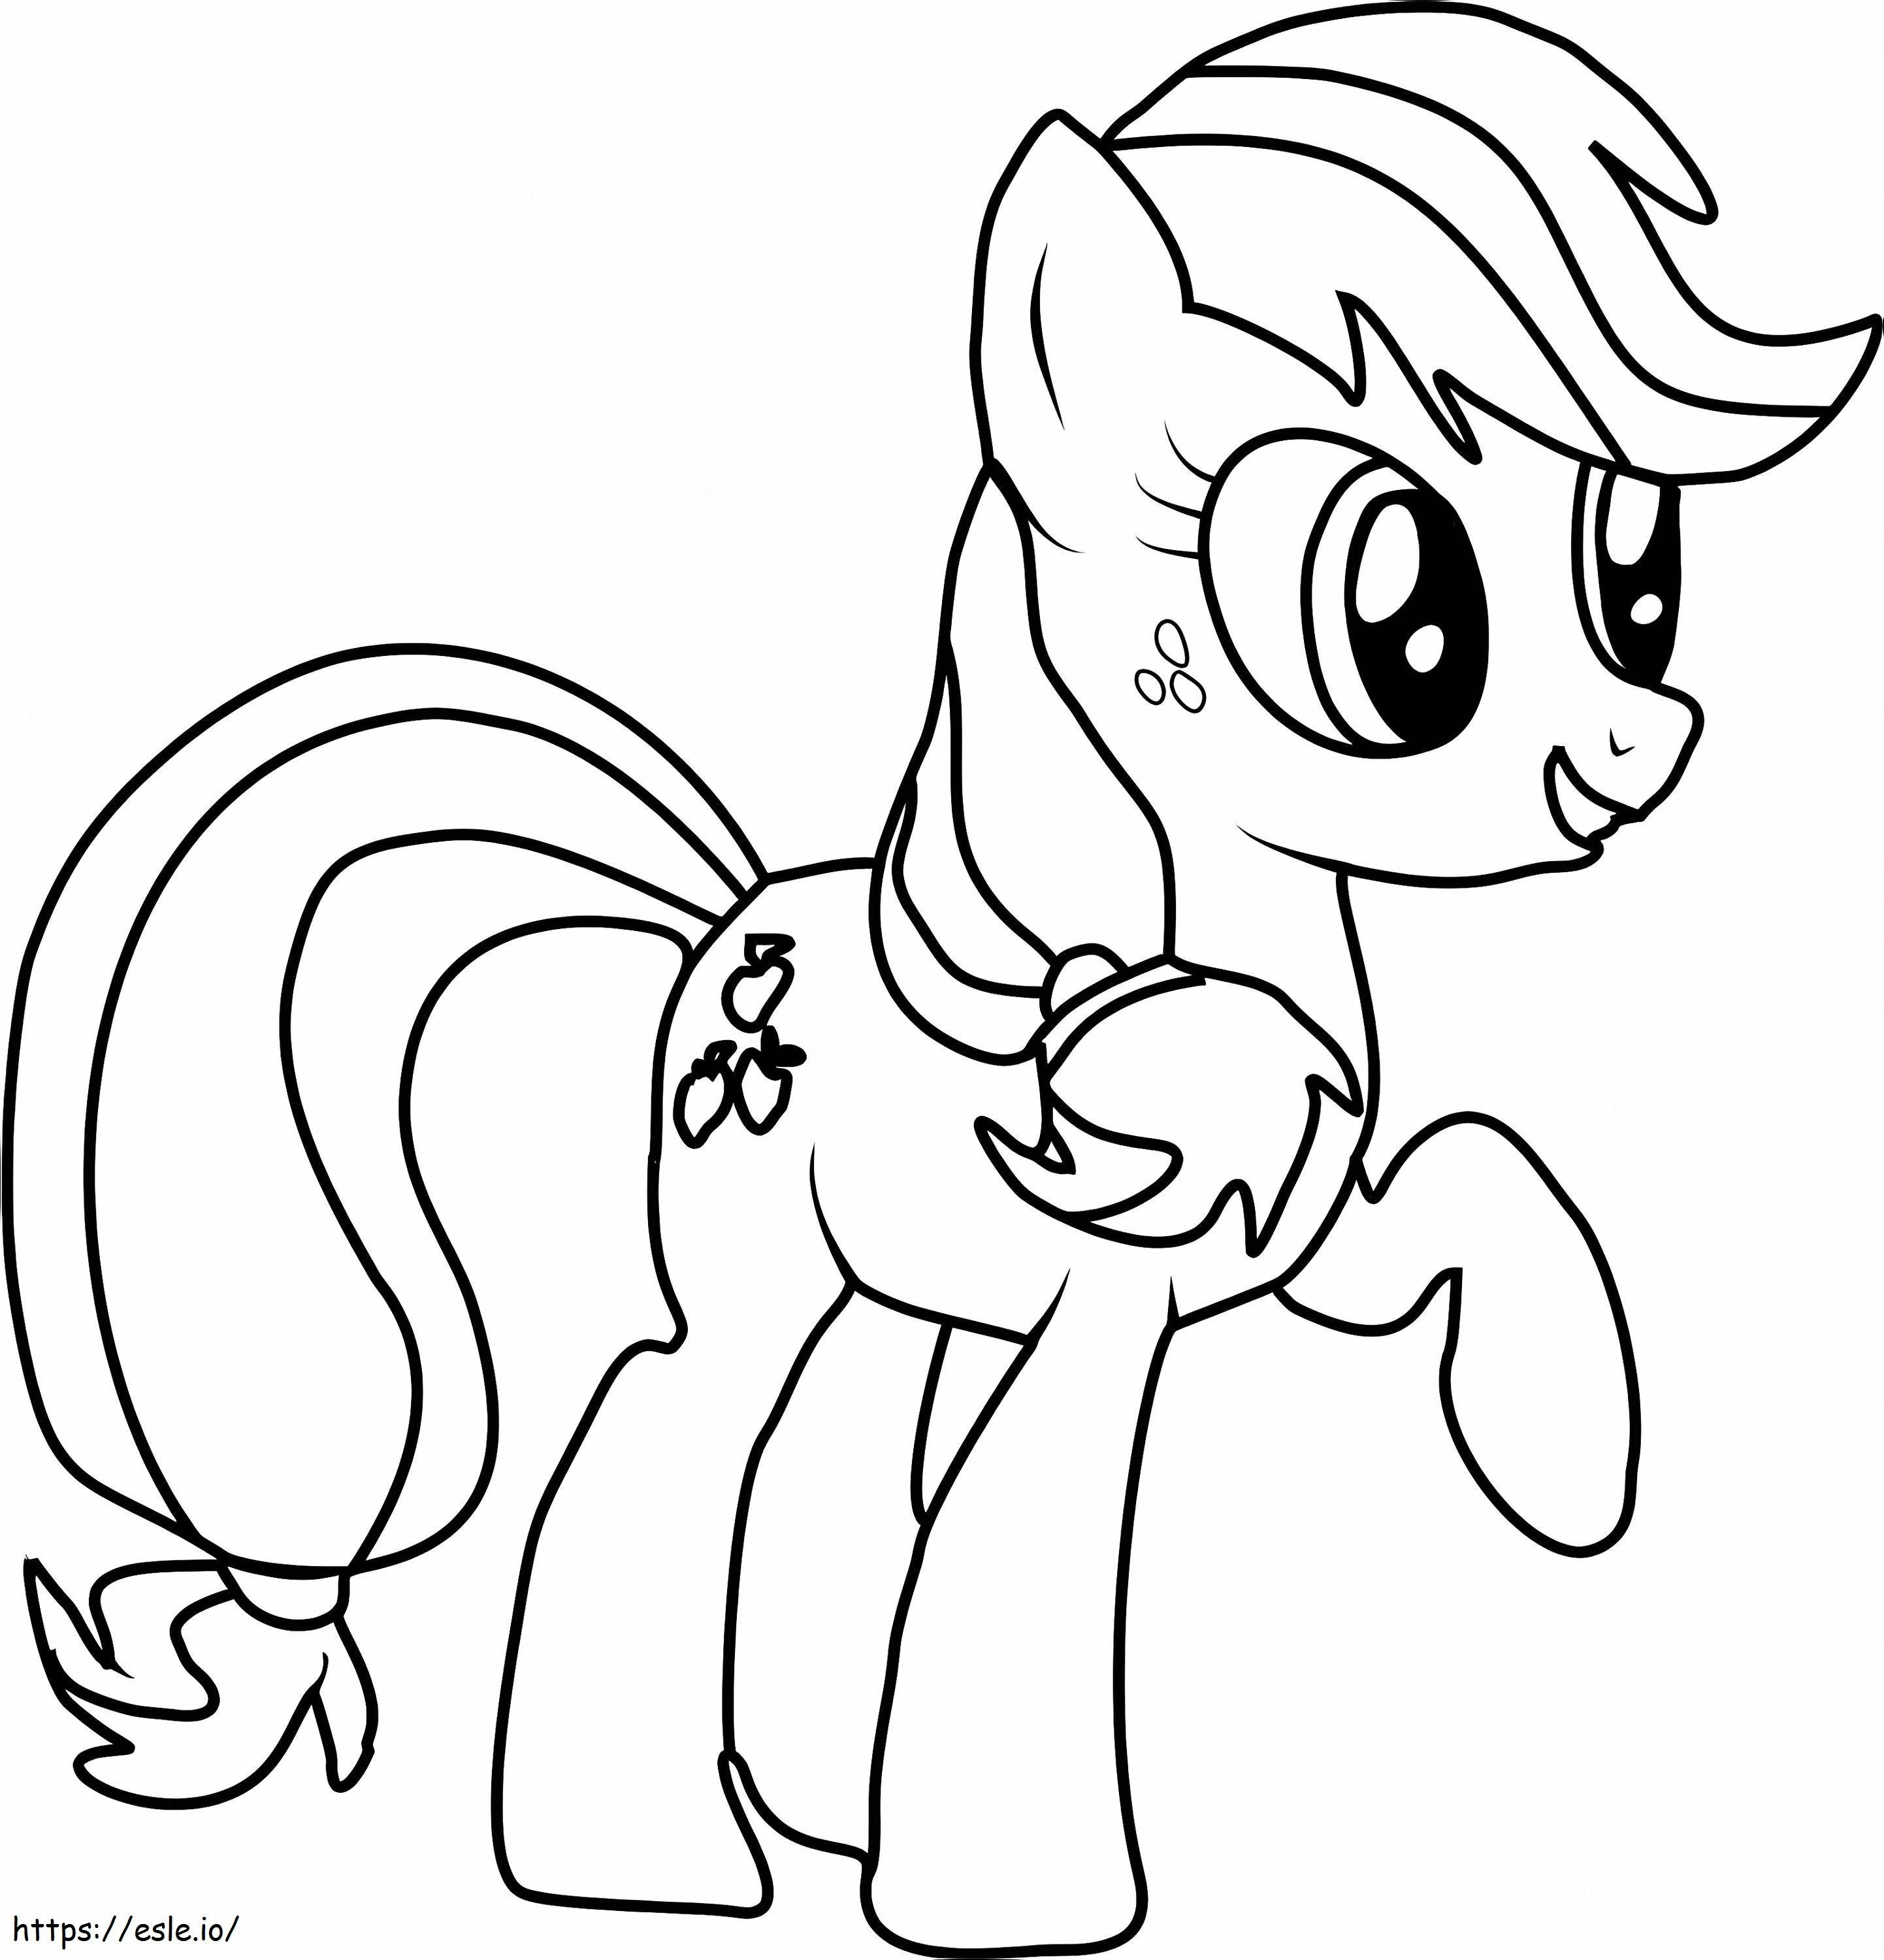 Applejack From MLP coloring page